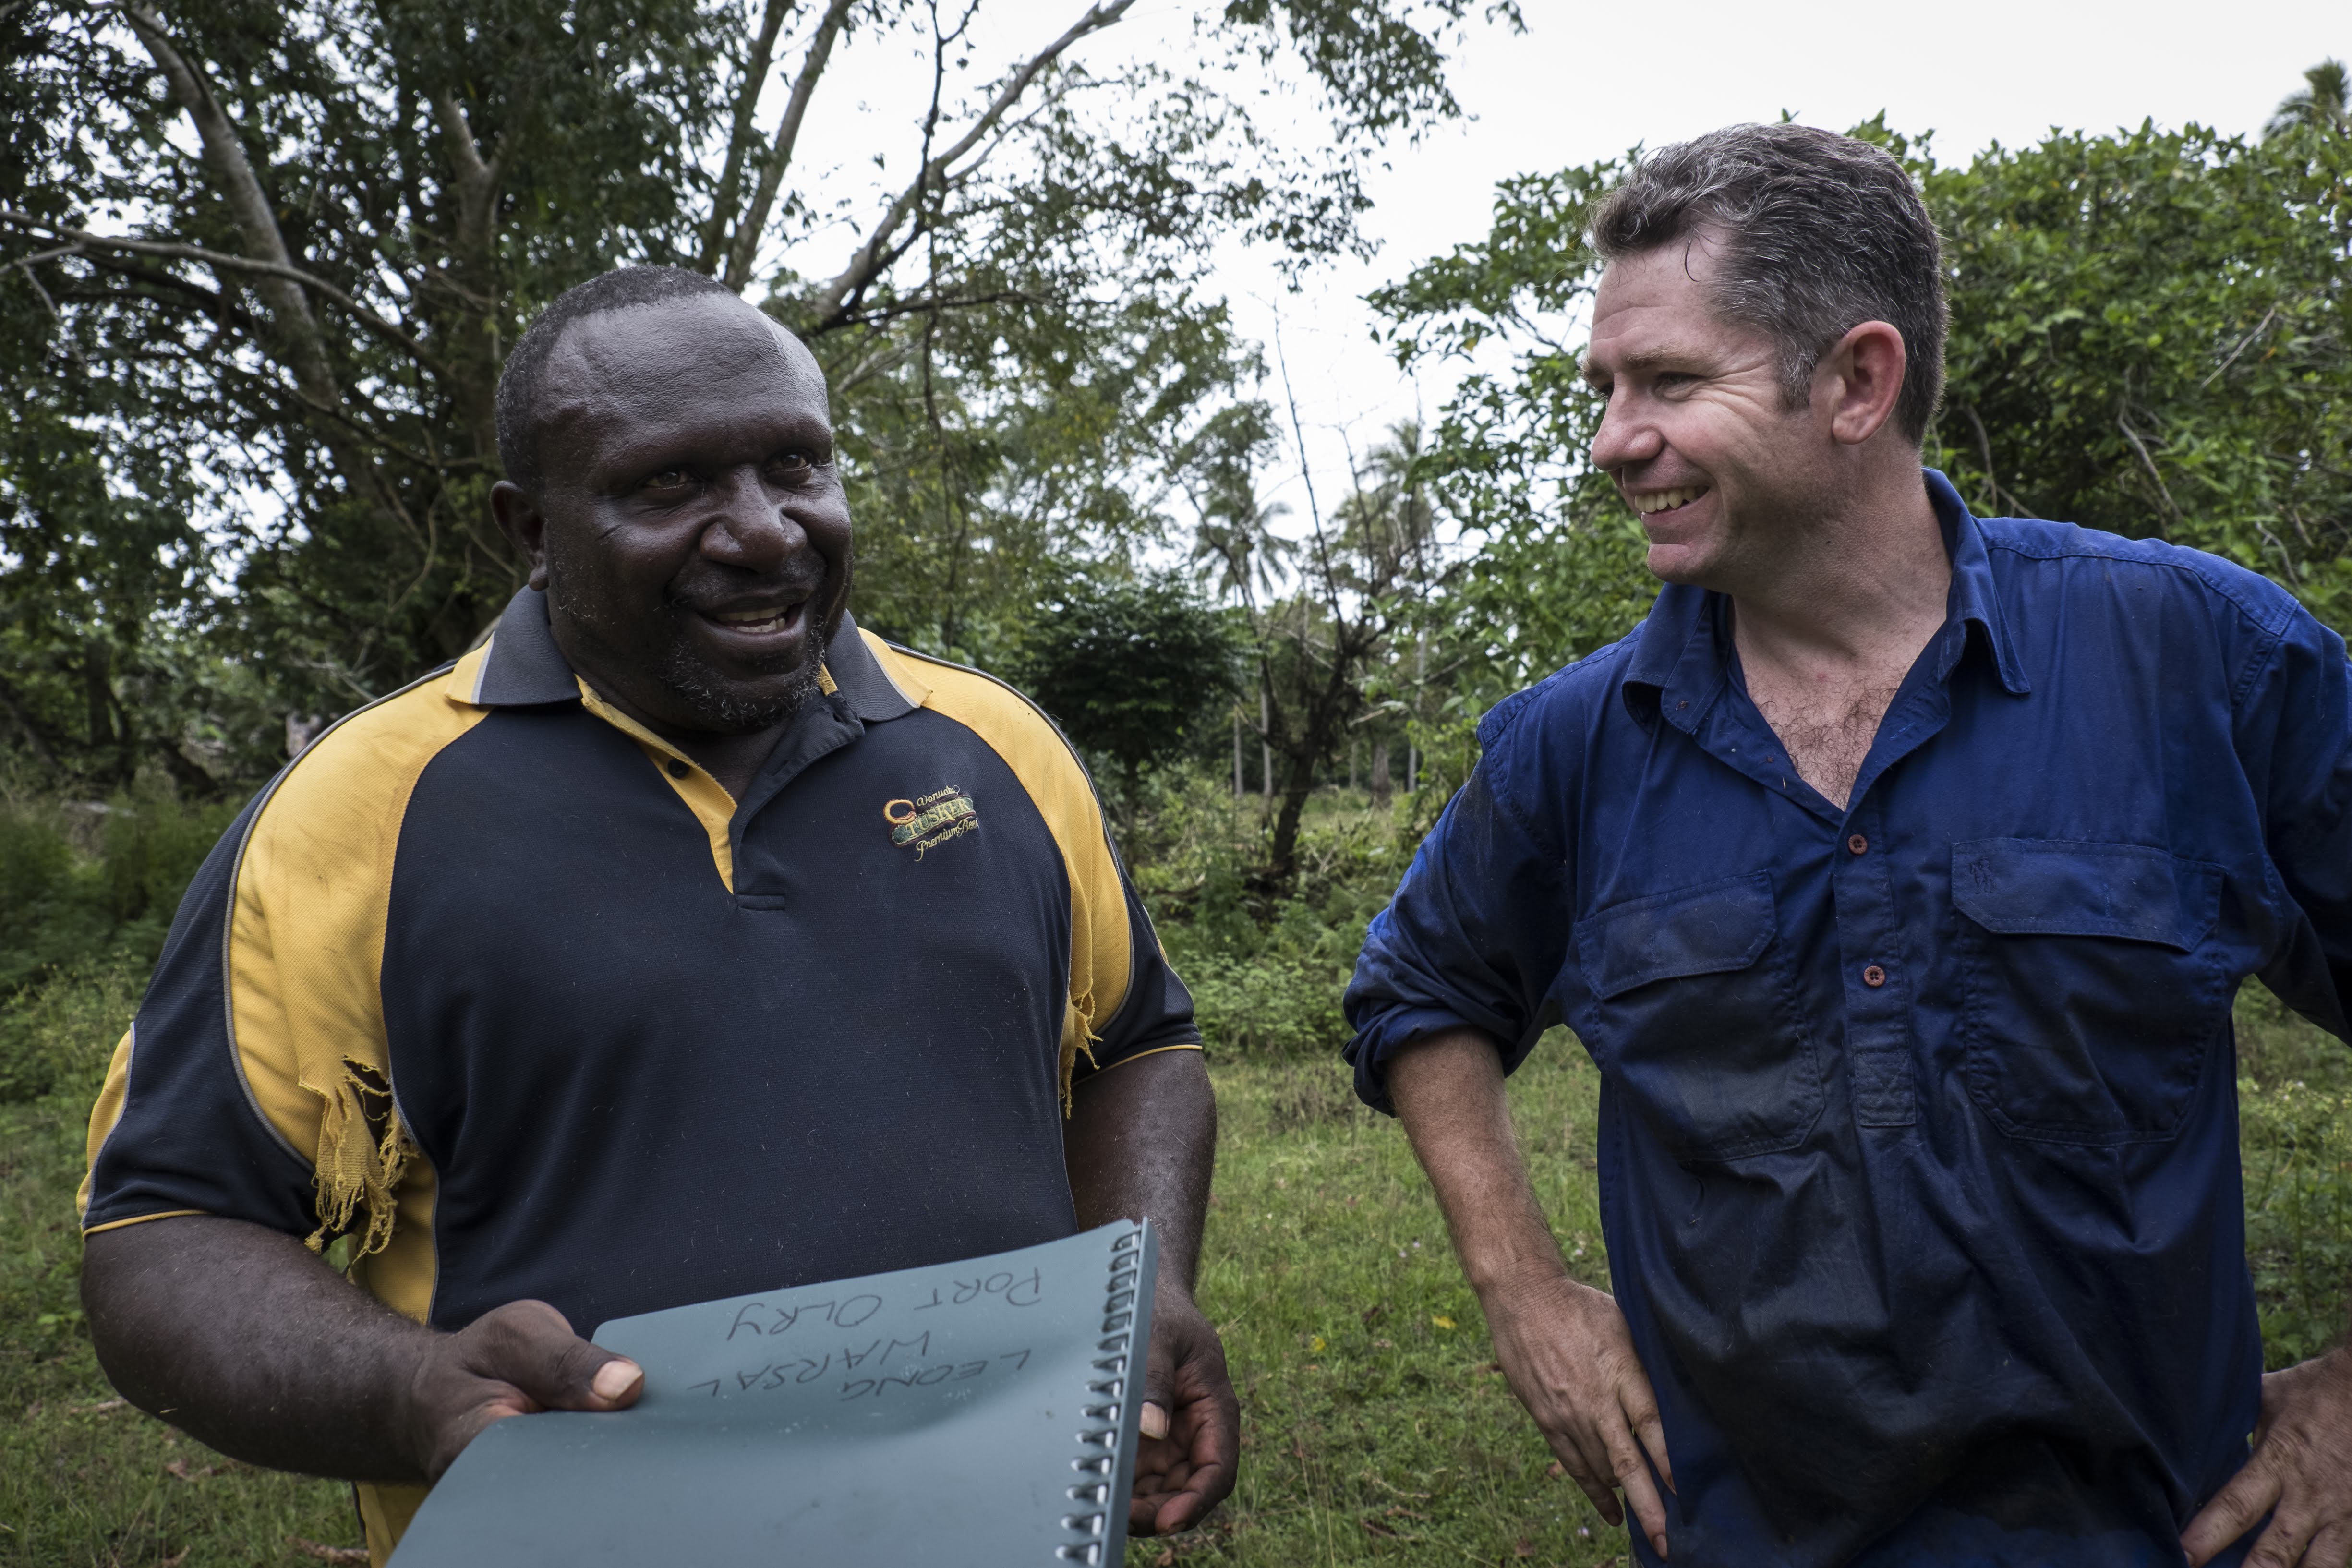 Simon Quigley from University of Queensland hands farmer Leon Warsaw Katty a Bisnis Blong Buluk folder with extension material and a list of Leon's cattle that were weighed and tagged inside the Bisnis Blong Buluk mobile cattle crush